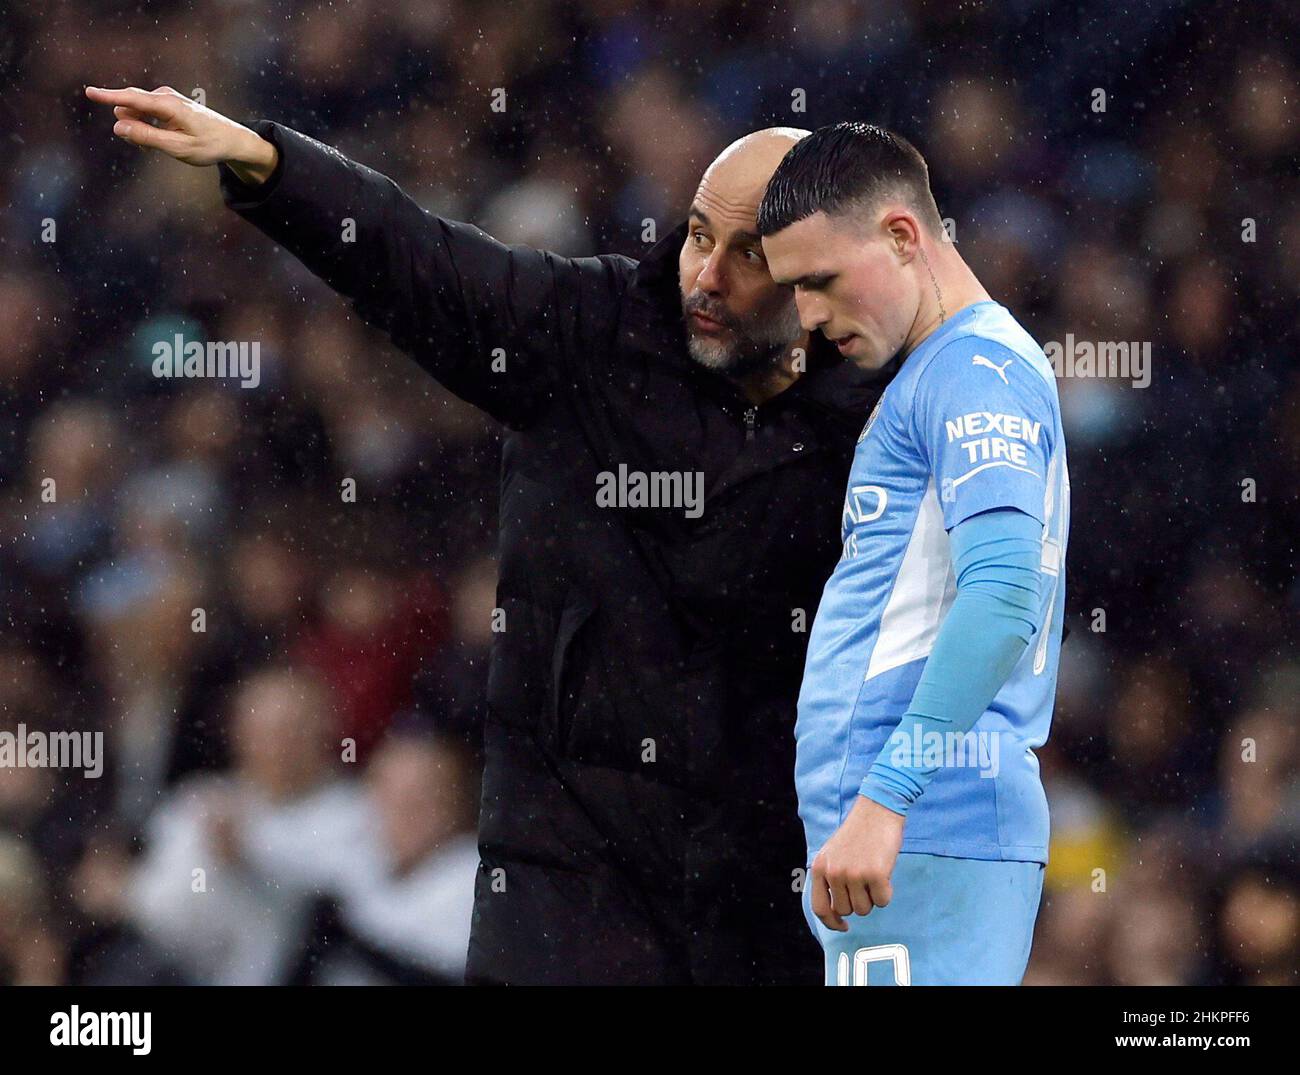 Soccer Football - FA Cup - Fourth Round - Manchester City v Fulham - Etihad Stadium, Manchester, Britain - February 5, 2022 Manchester City manager Pep Guardiola speaks with Phil Foden Action Images via Reuters/Jason Cairnduff Stock Photo